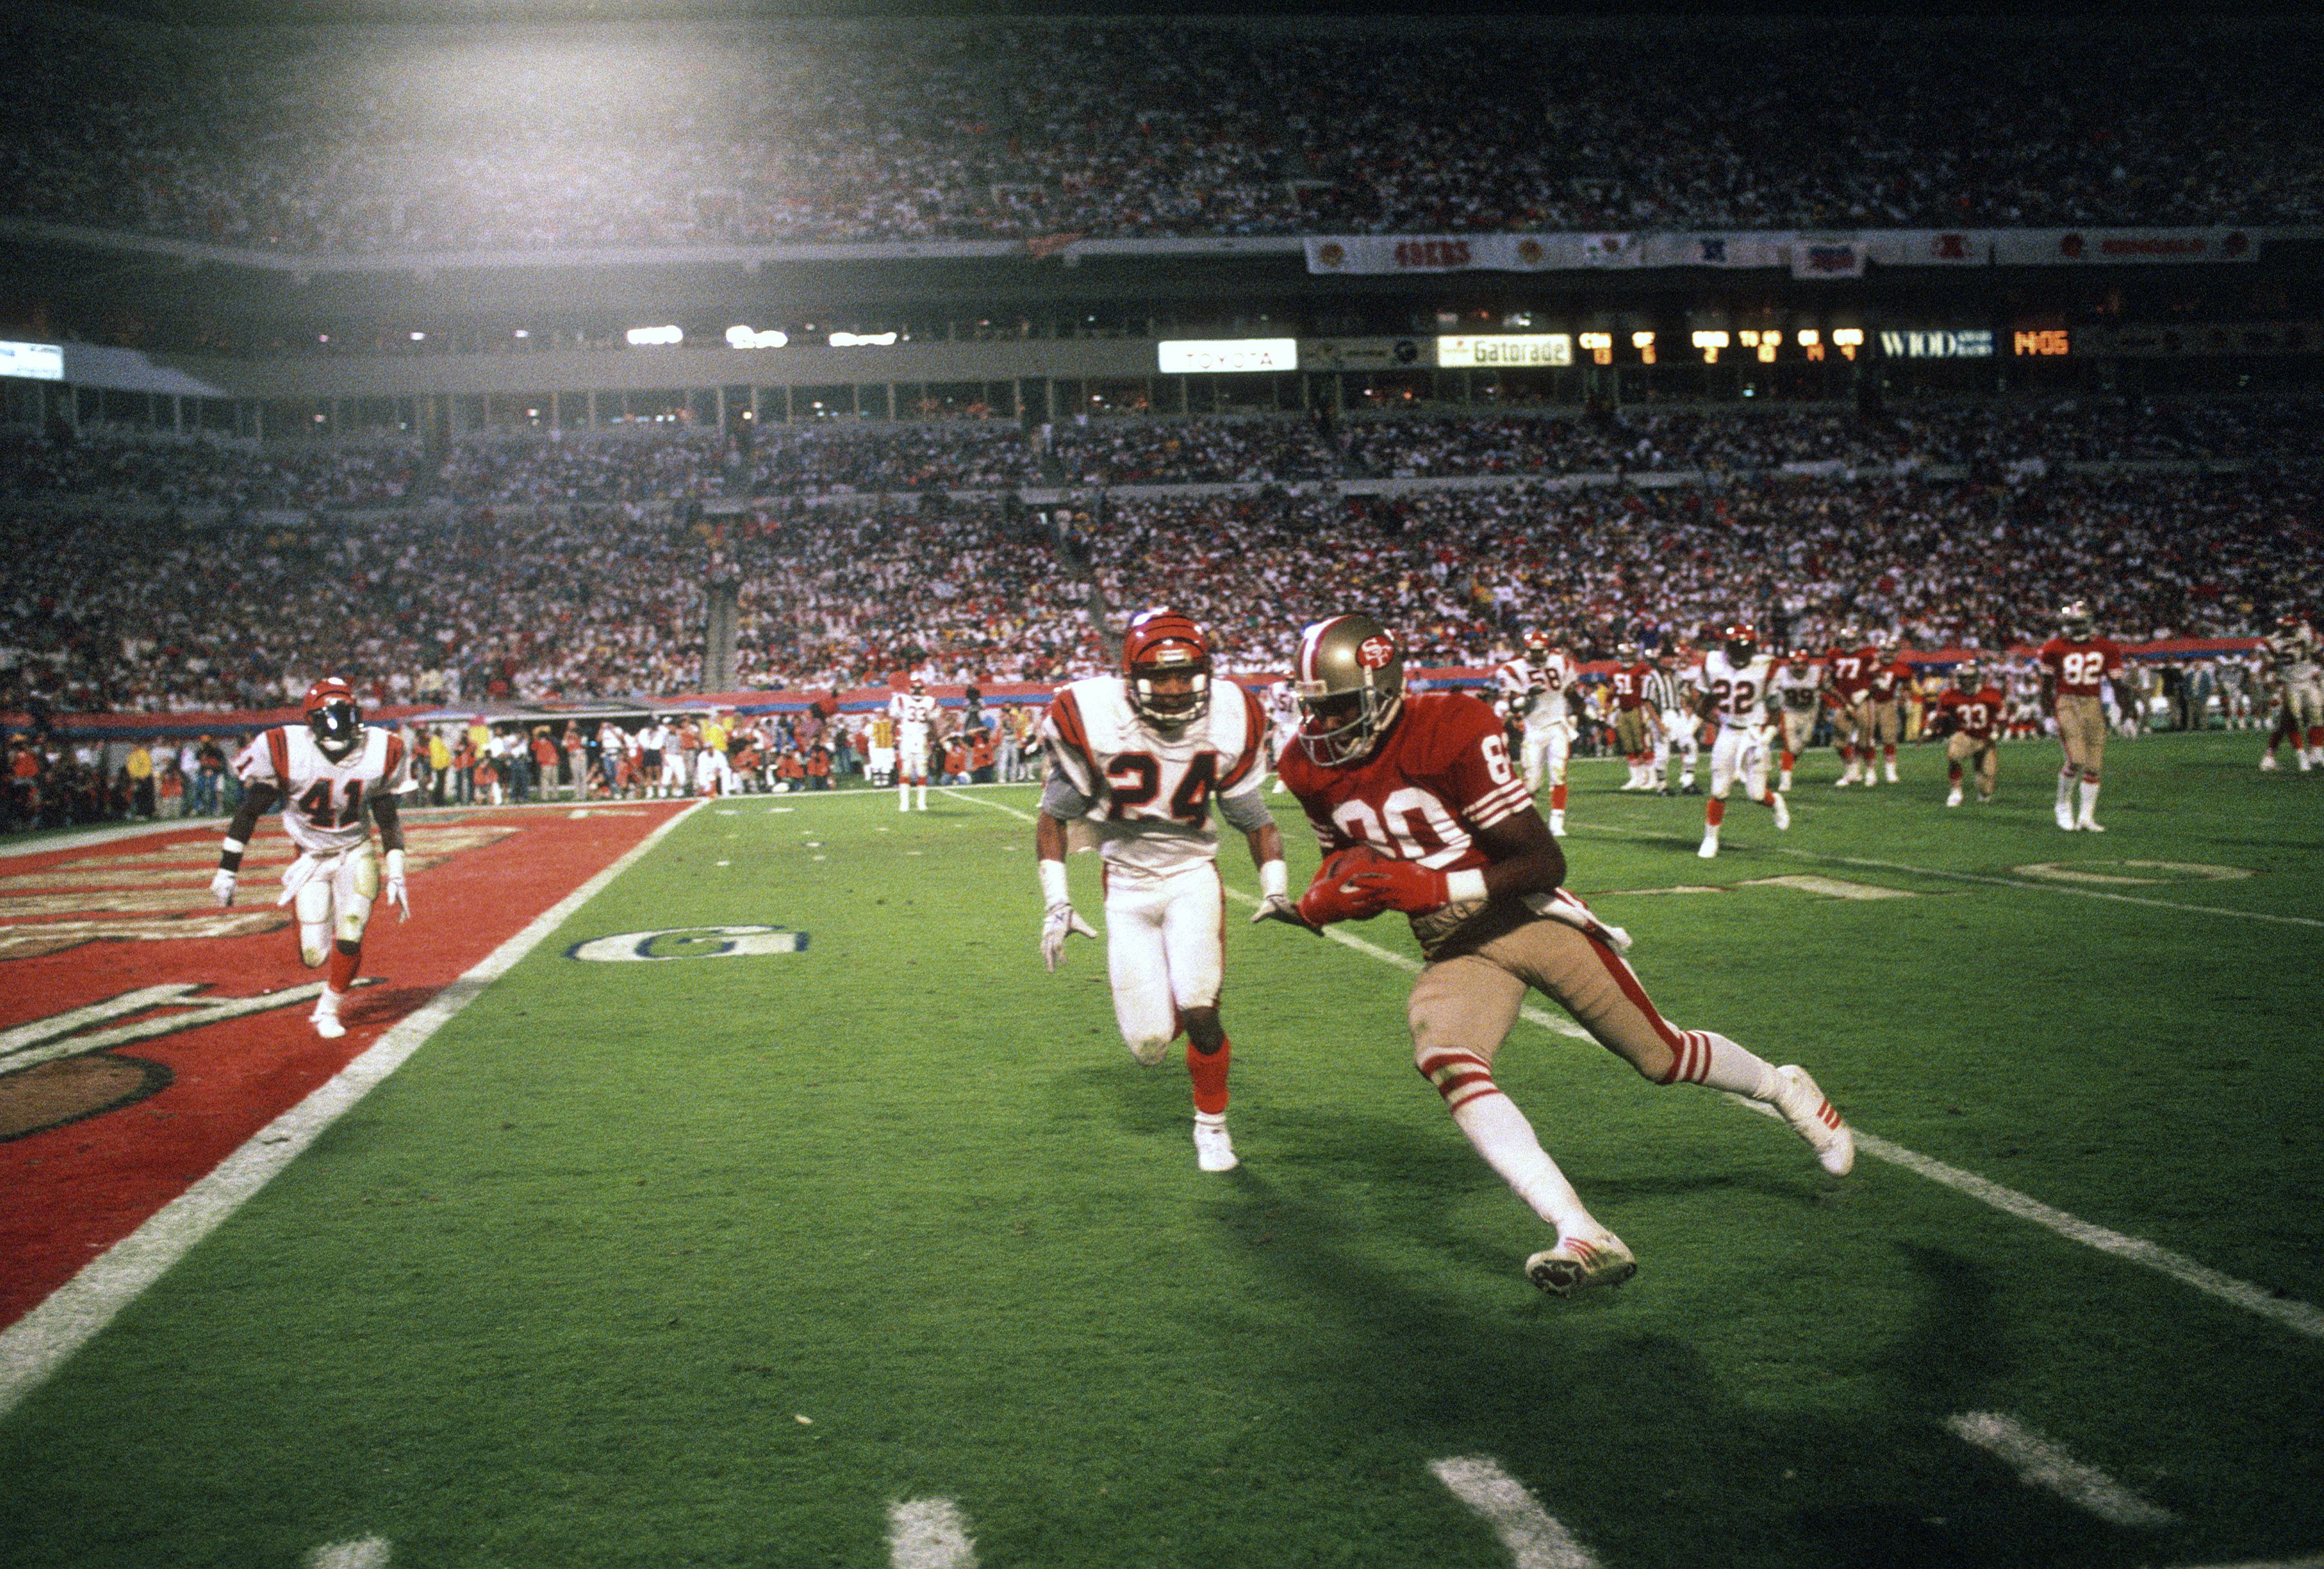 Jerry Rice dives for the endzone